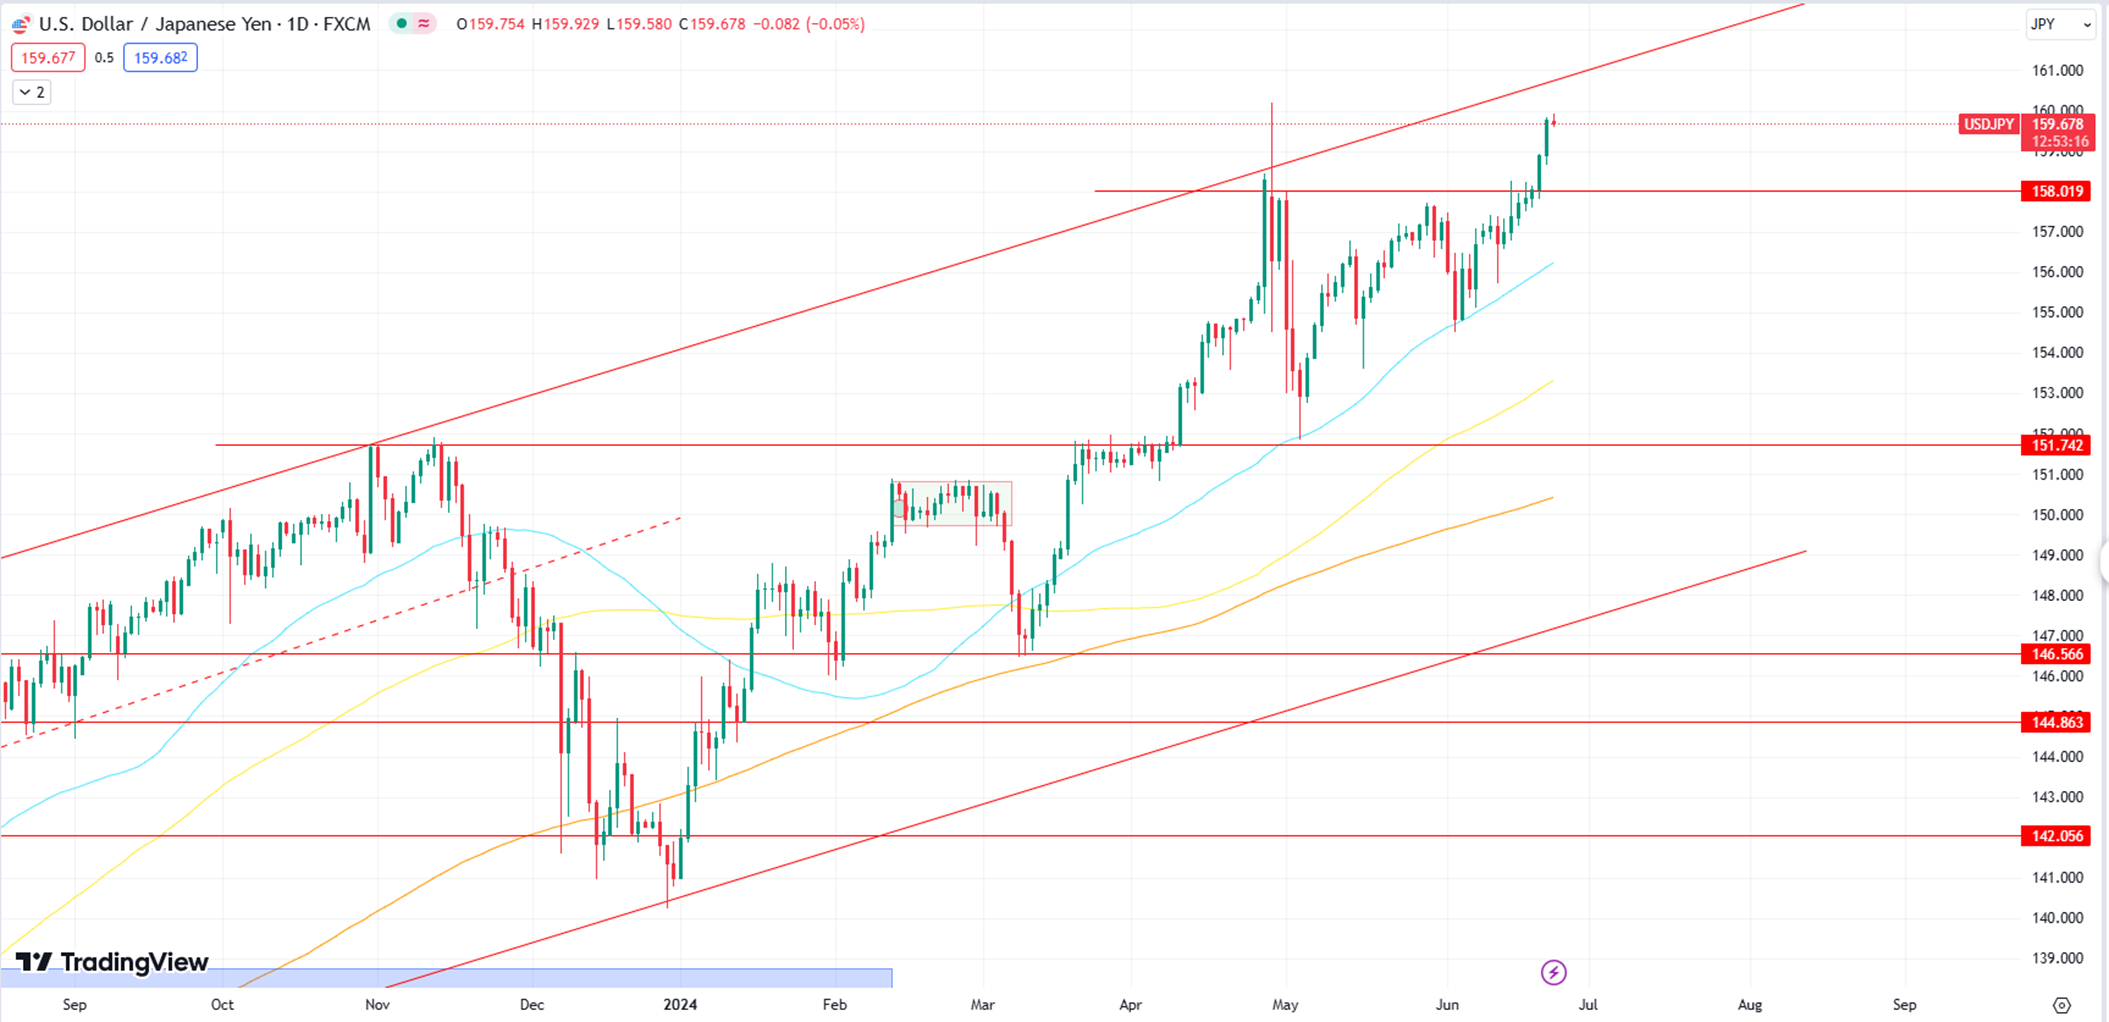 USD/JPY Targets 161.00 as BOE Intervention Looms